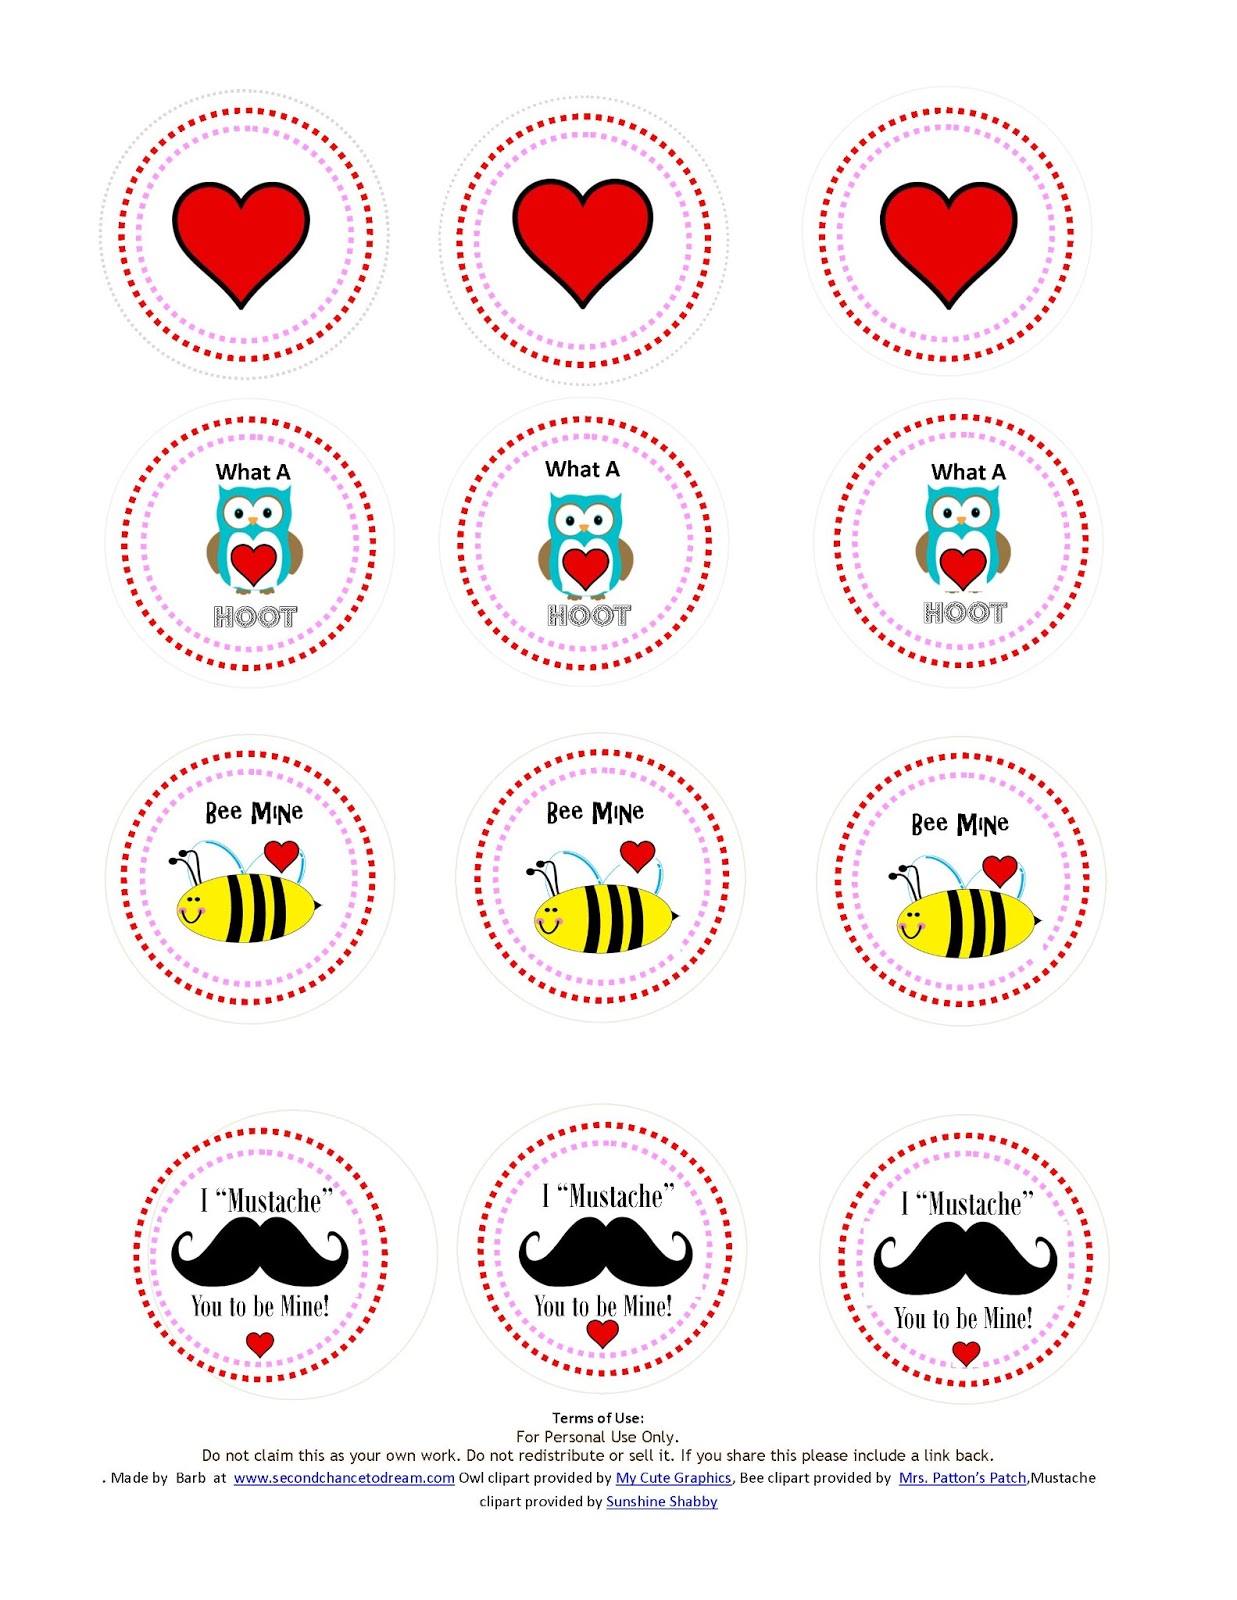 second-chance-to-dream-printable-valentine-s-day-cards-and-cupcake